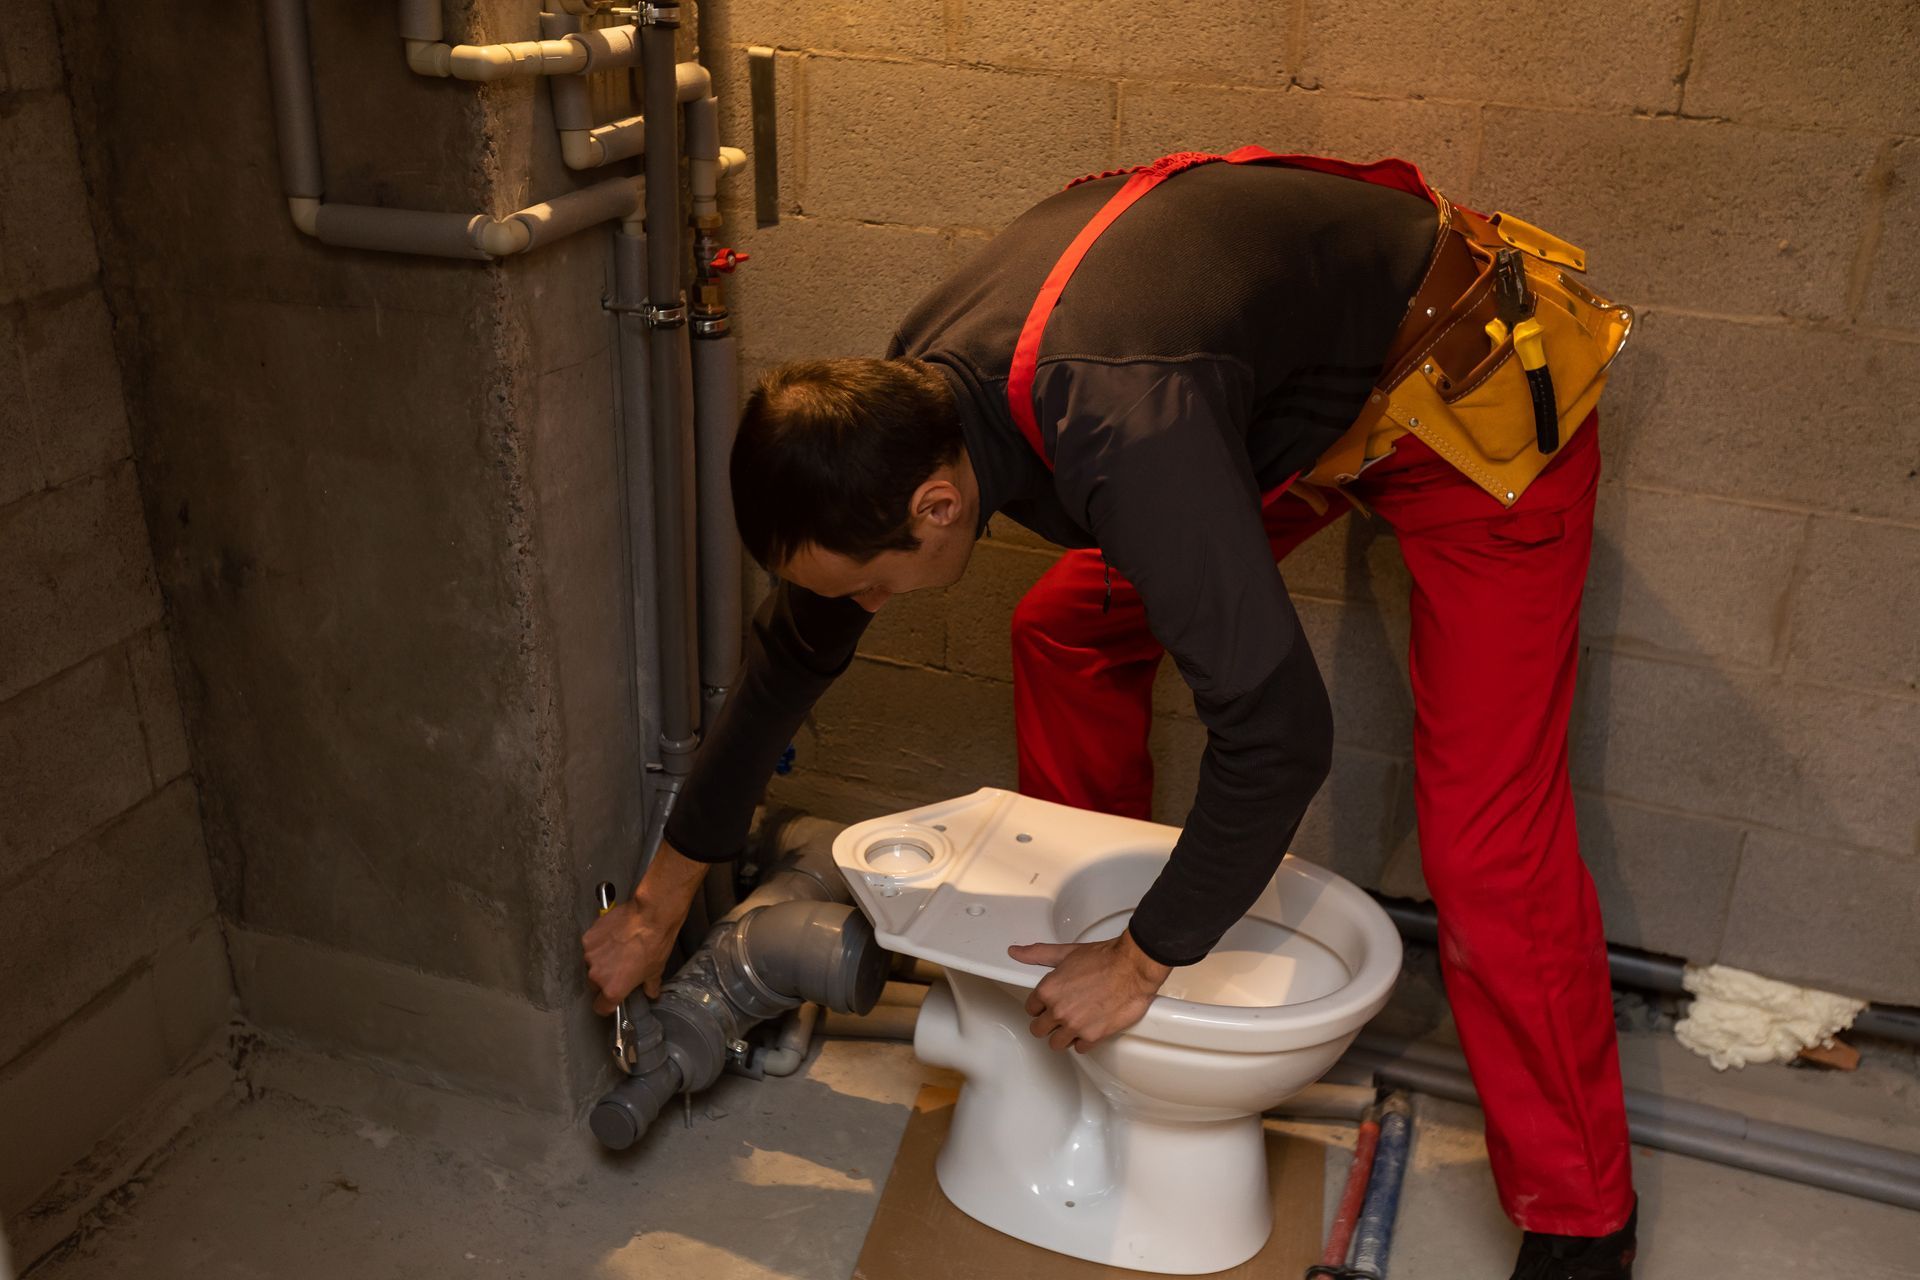 A man is installing a toilet in a bathroom.